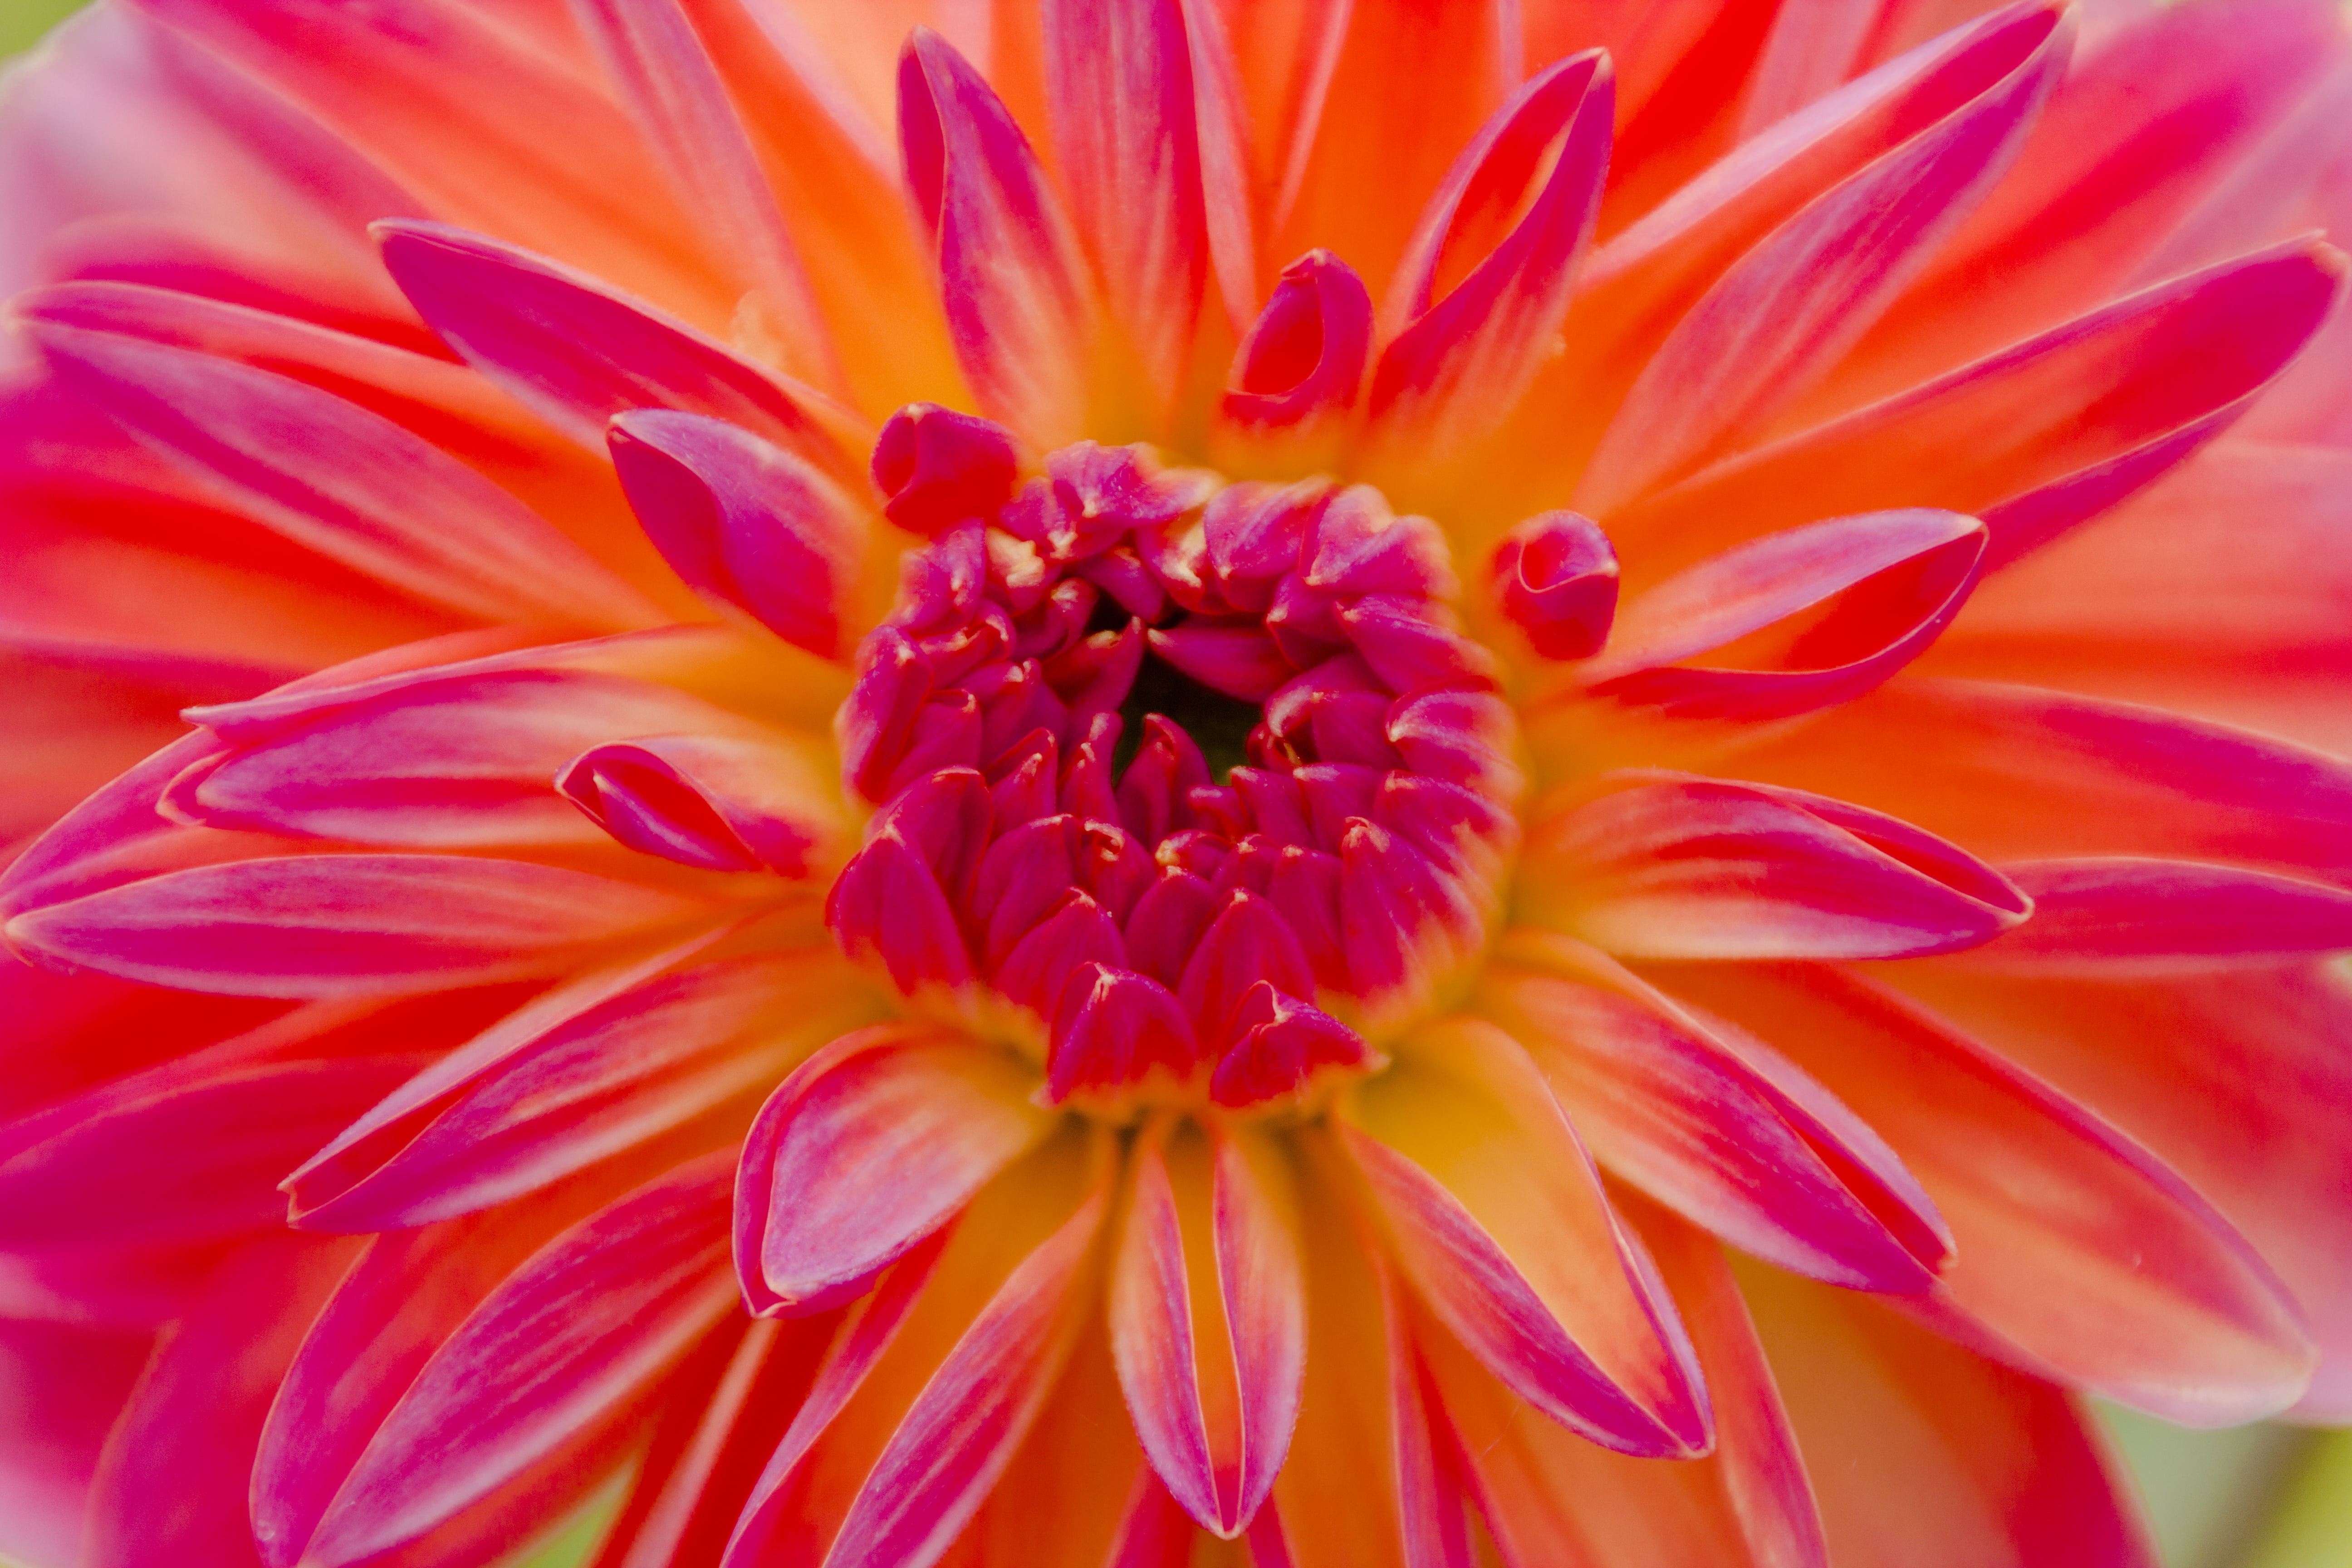 closeup photography of red and yellow petaled flower, dahlia